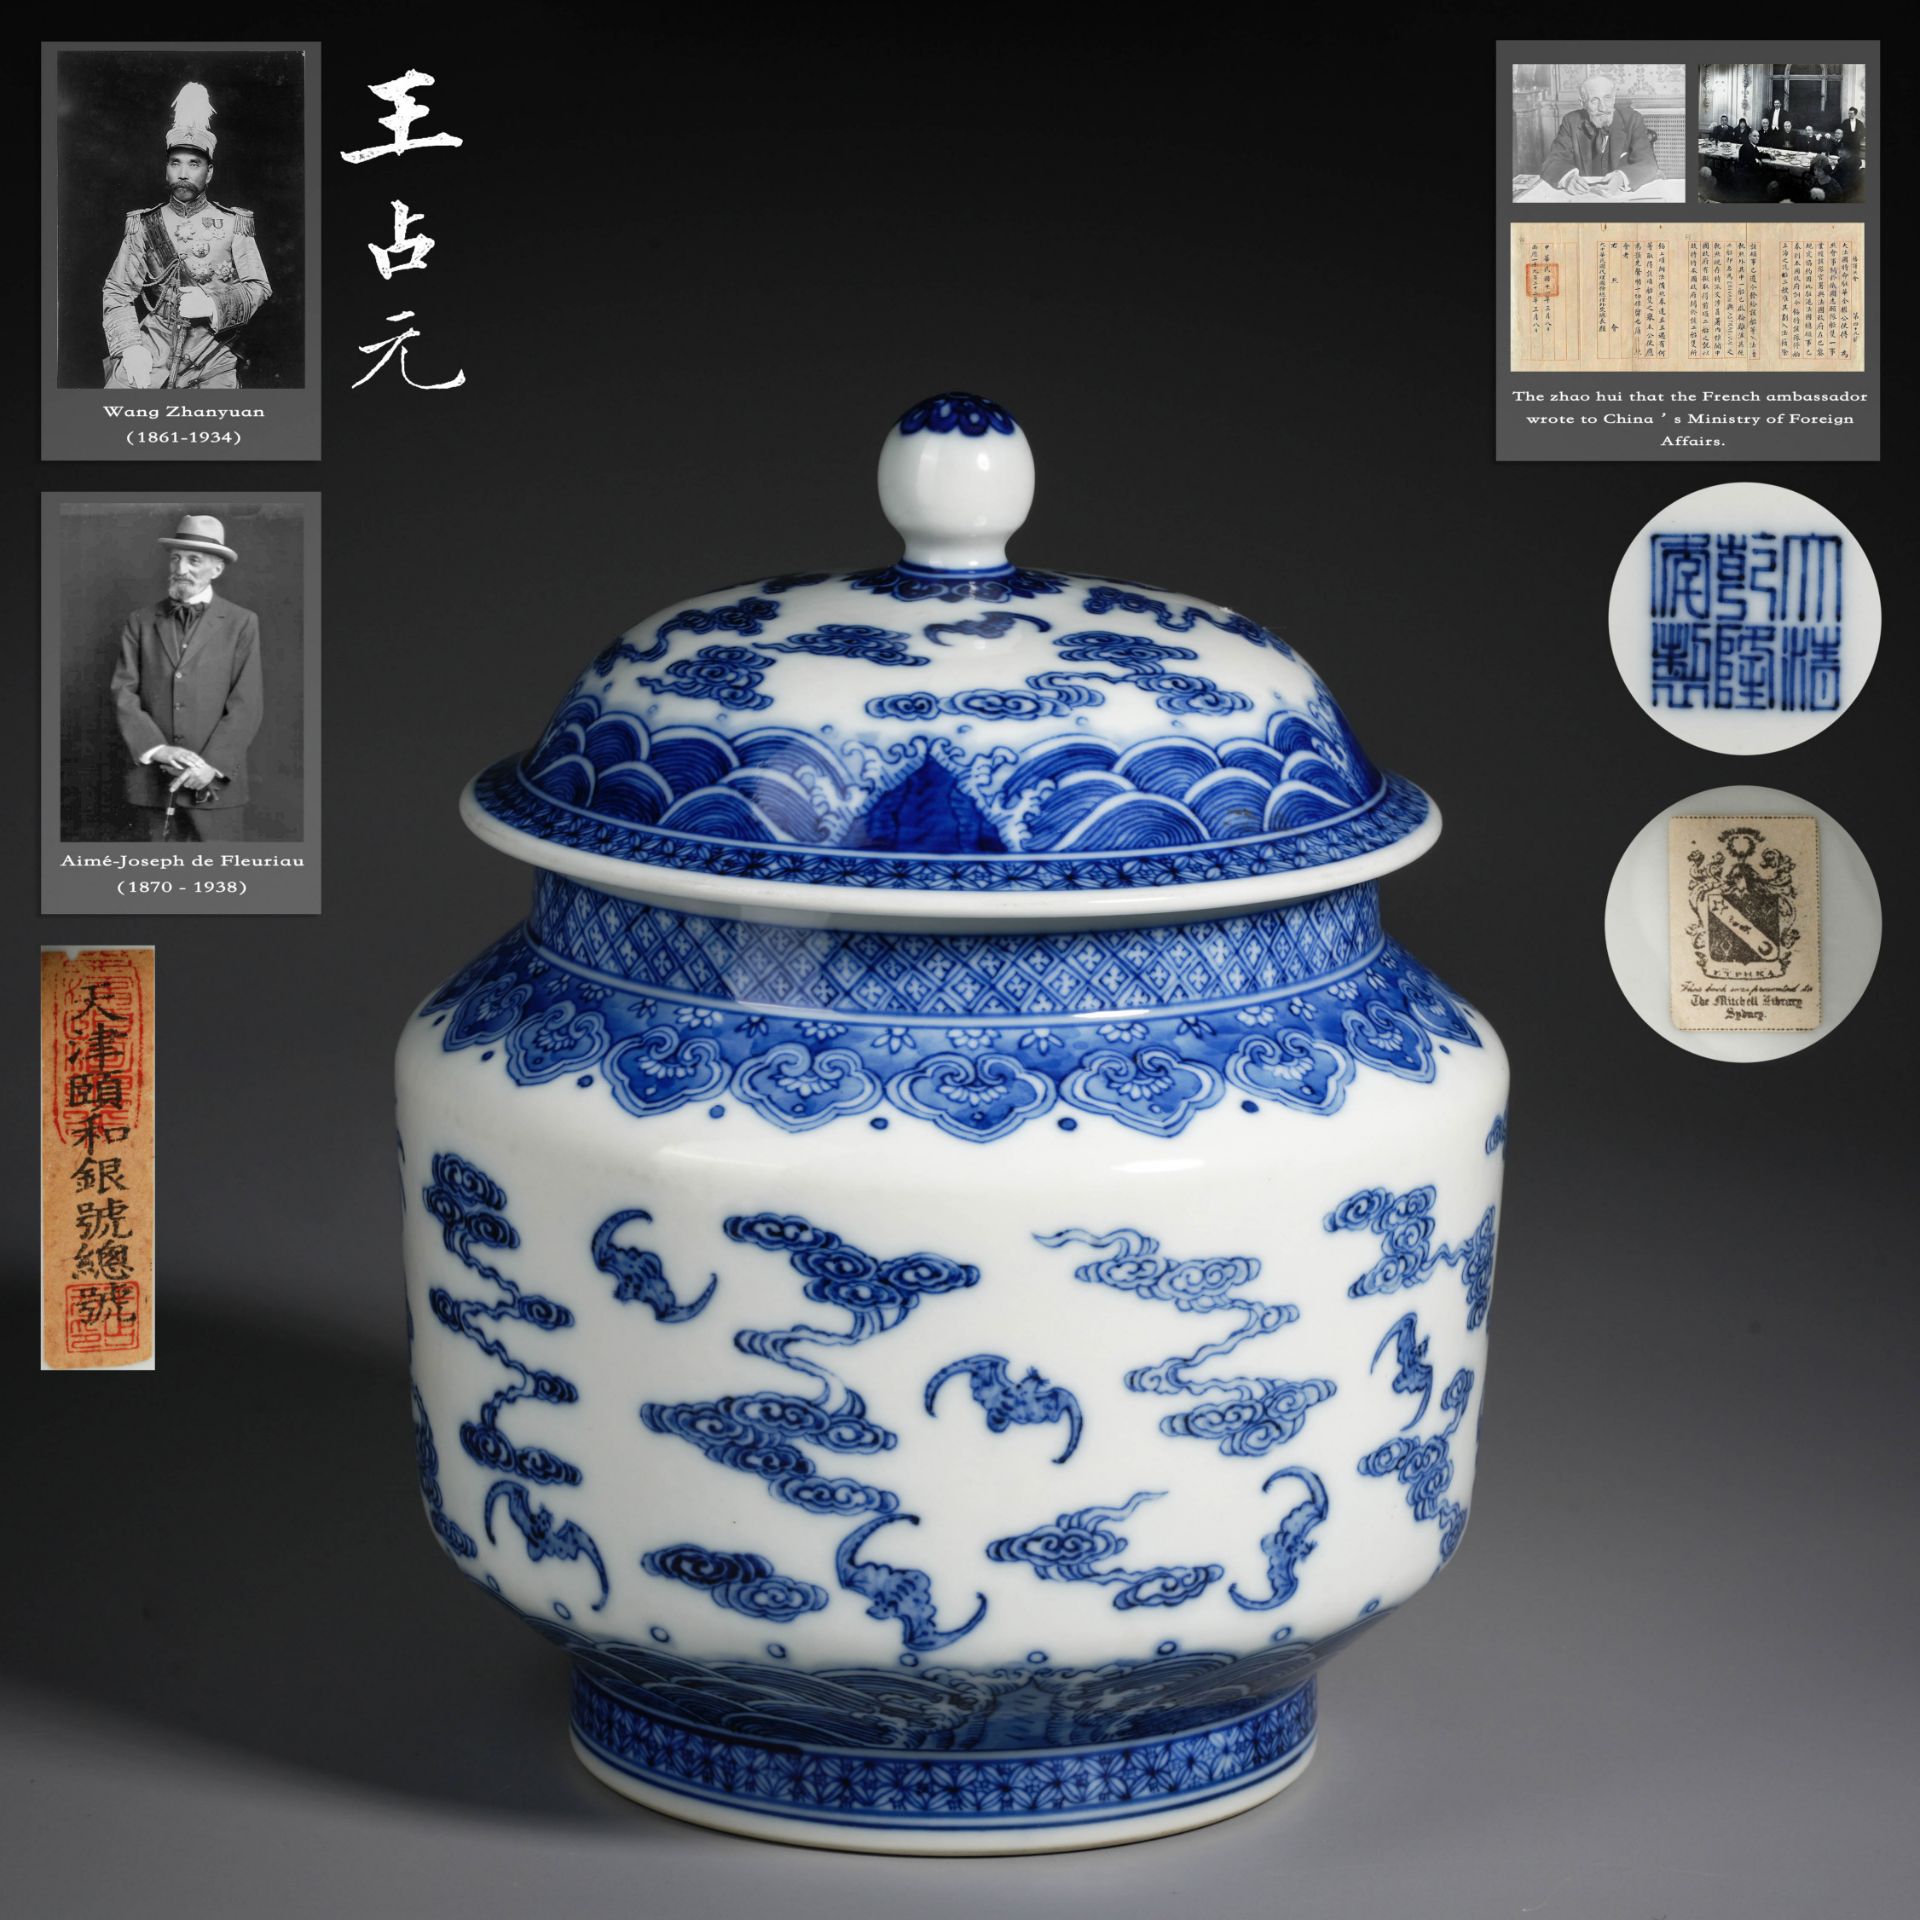 A Chinese Blue and White Bats Jar with Cover